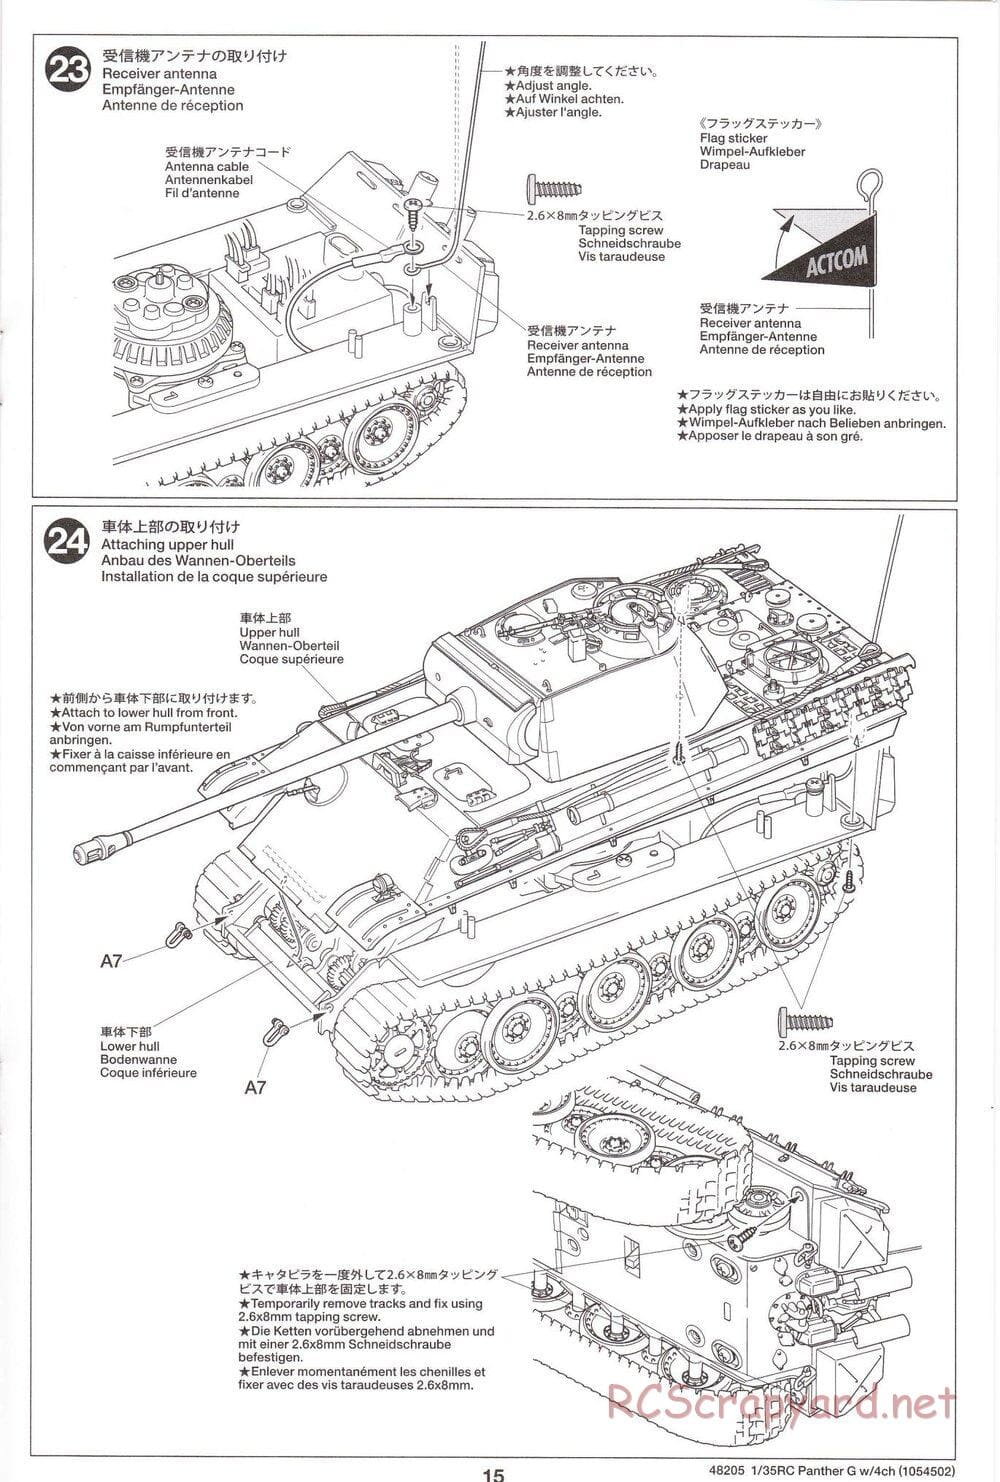 Tamiya - German Panther Type G - 1/35 Scale Chassis - Manual - Page 15